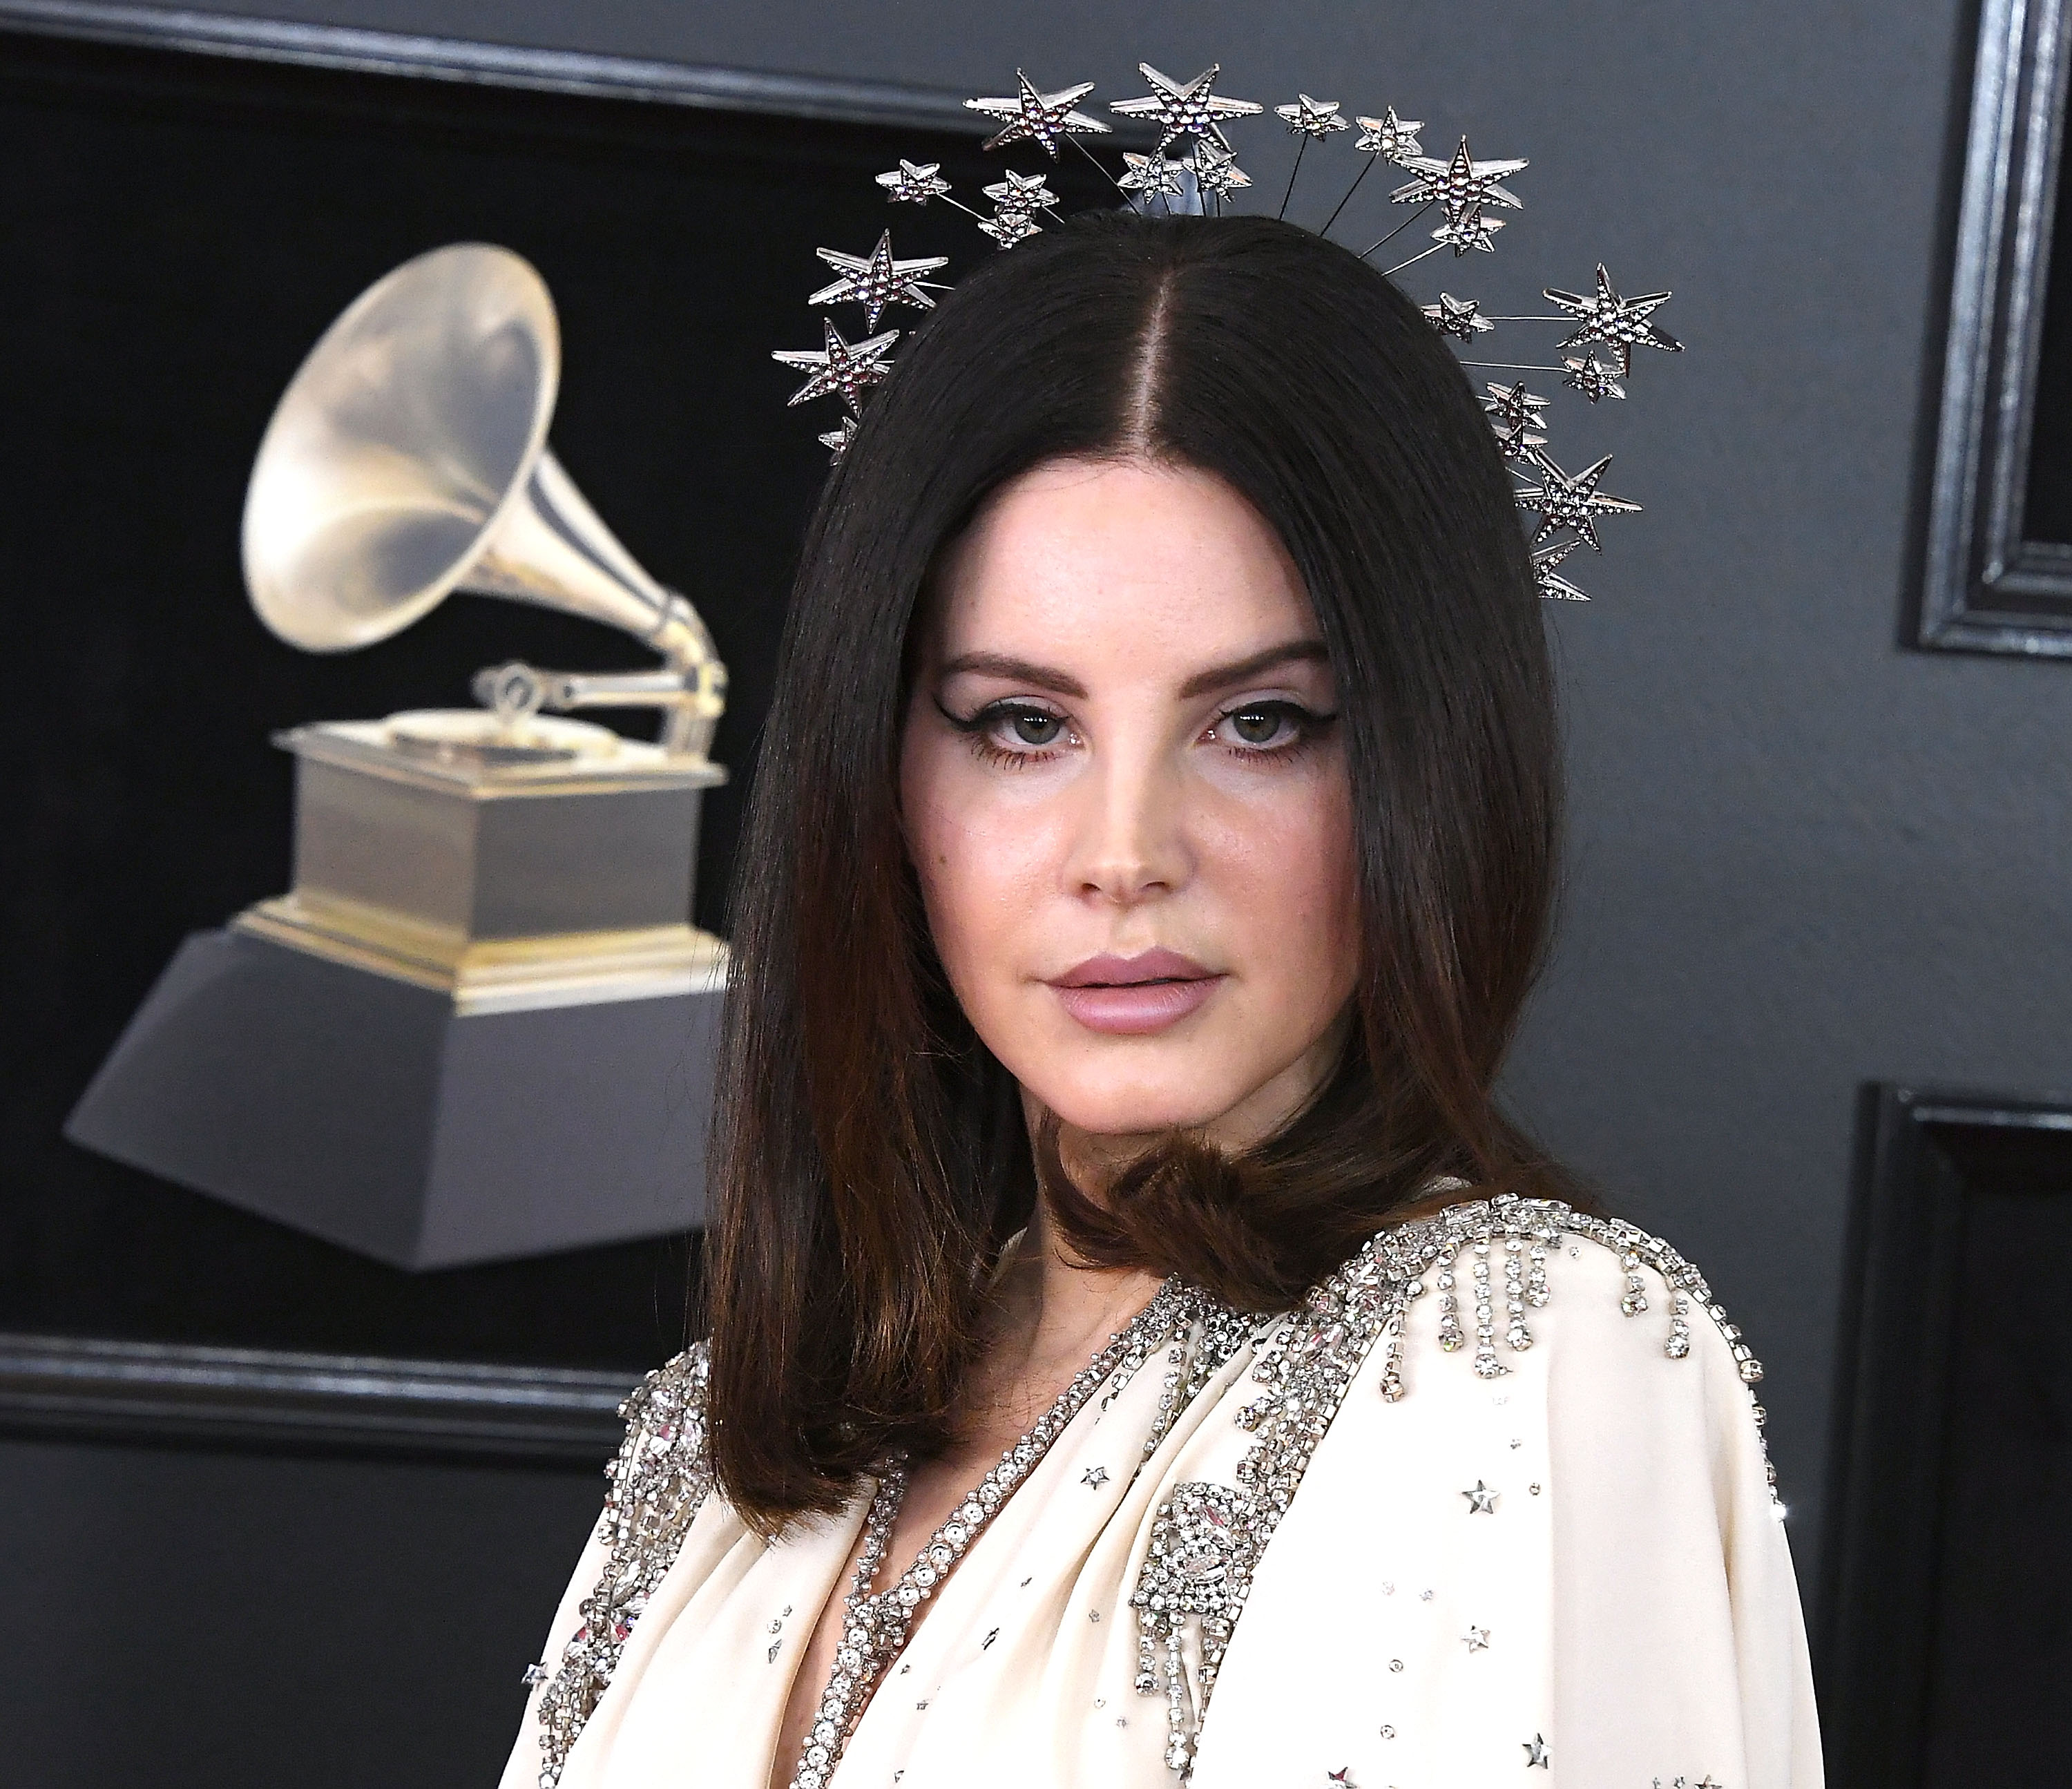 The Police Arrested A Man In Orlando Planning To Kidnap Lana Del Rey